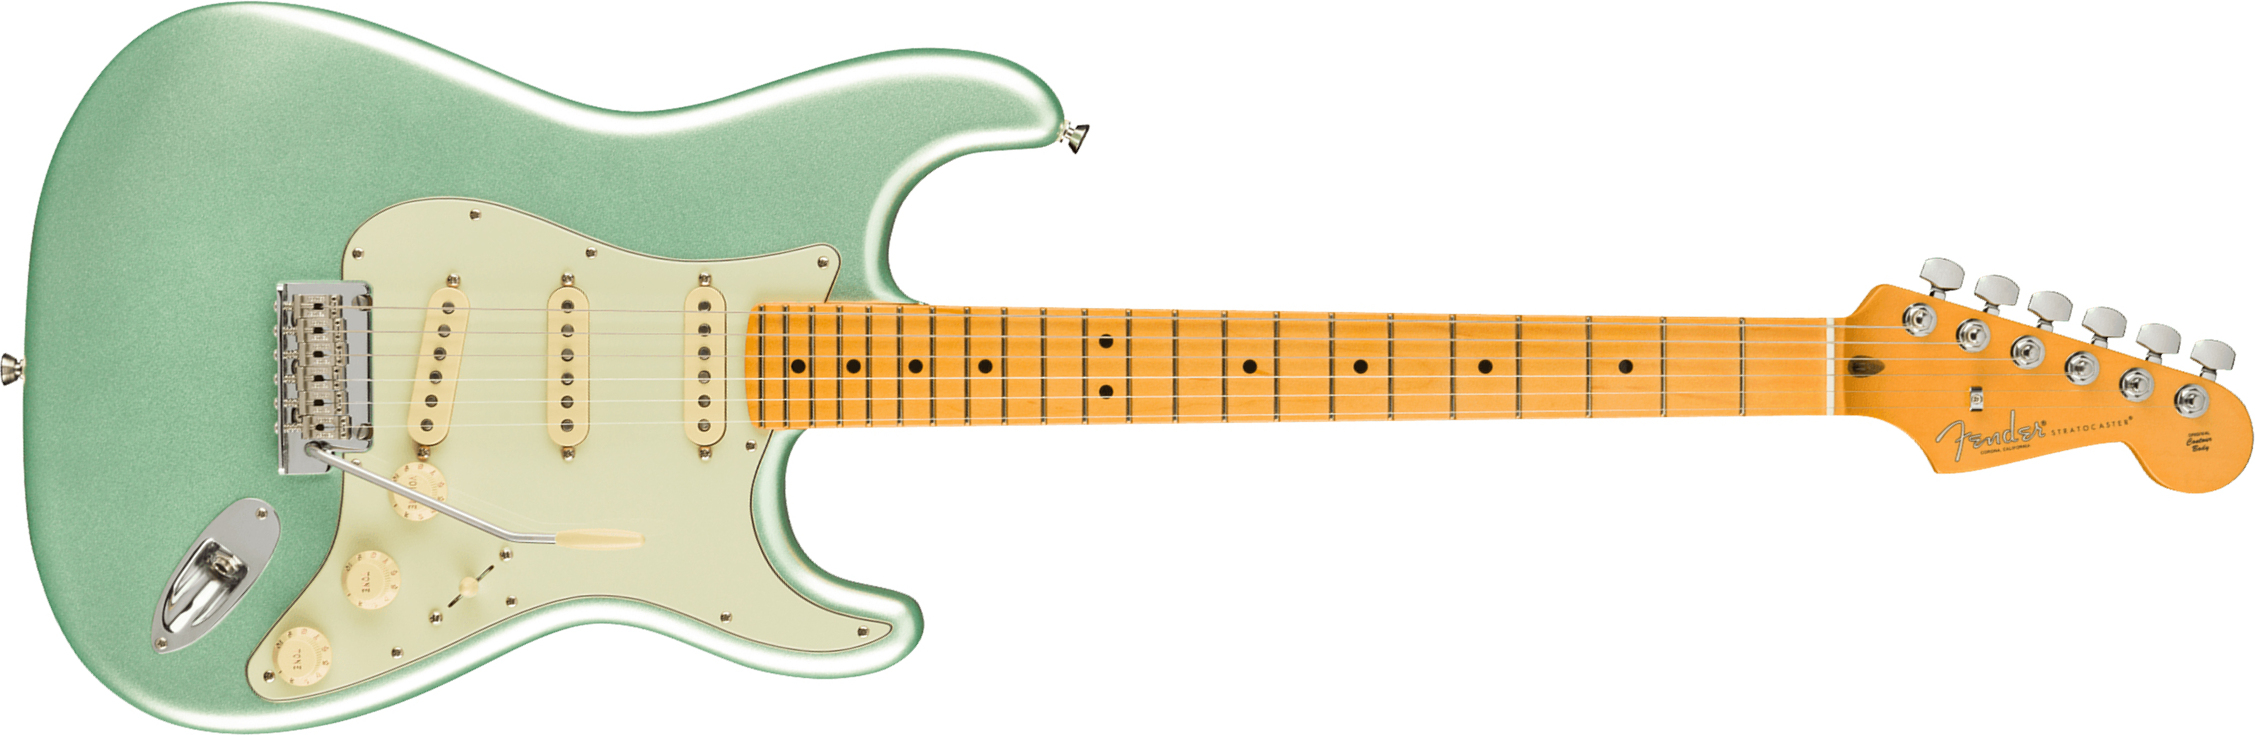 Fender Strat American Professional Ii Usa Mn - Mystic Surf Green - Str shape electric guitar - Main picture